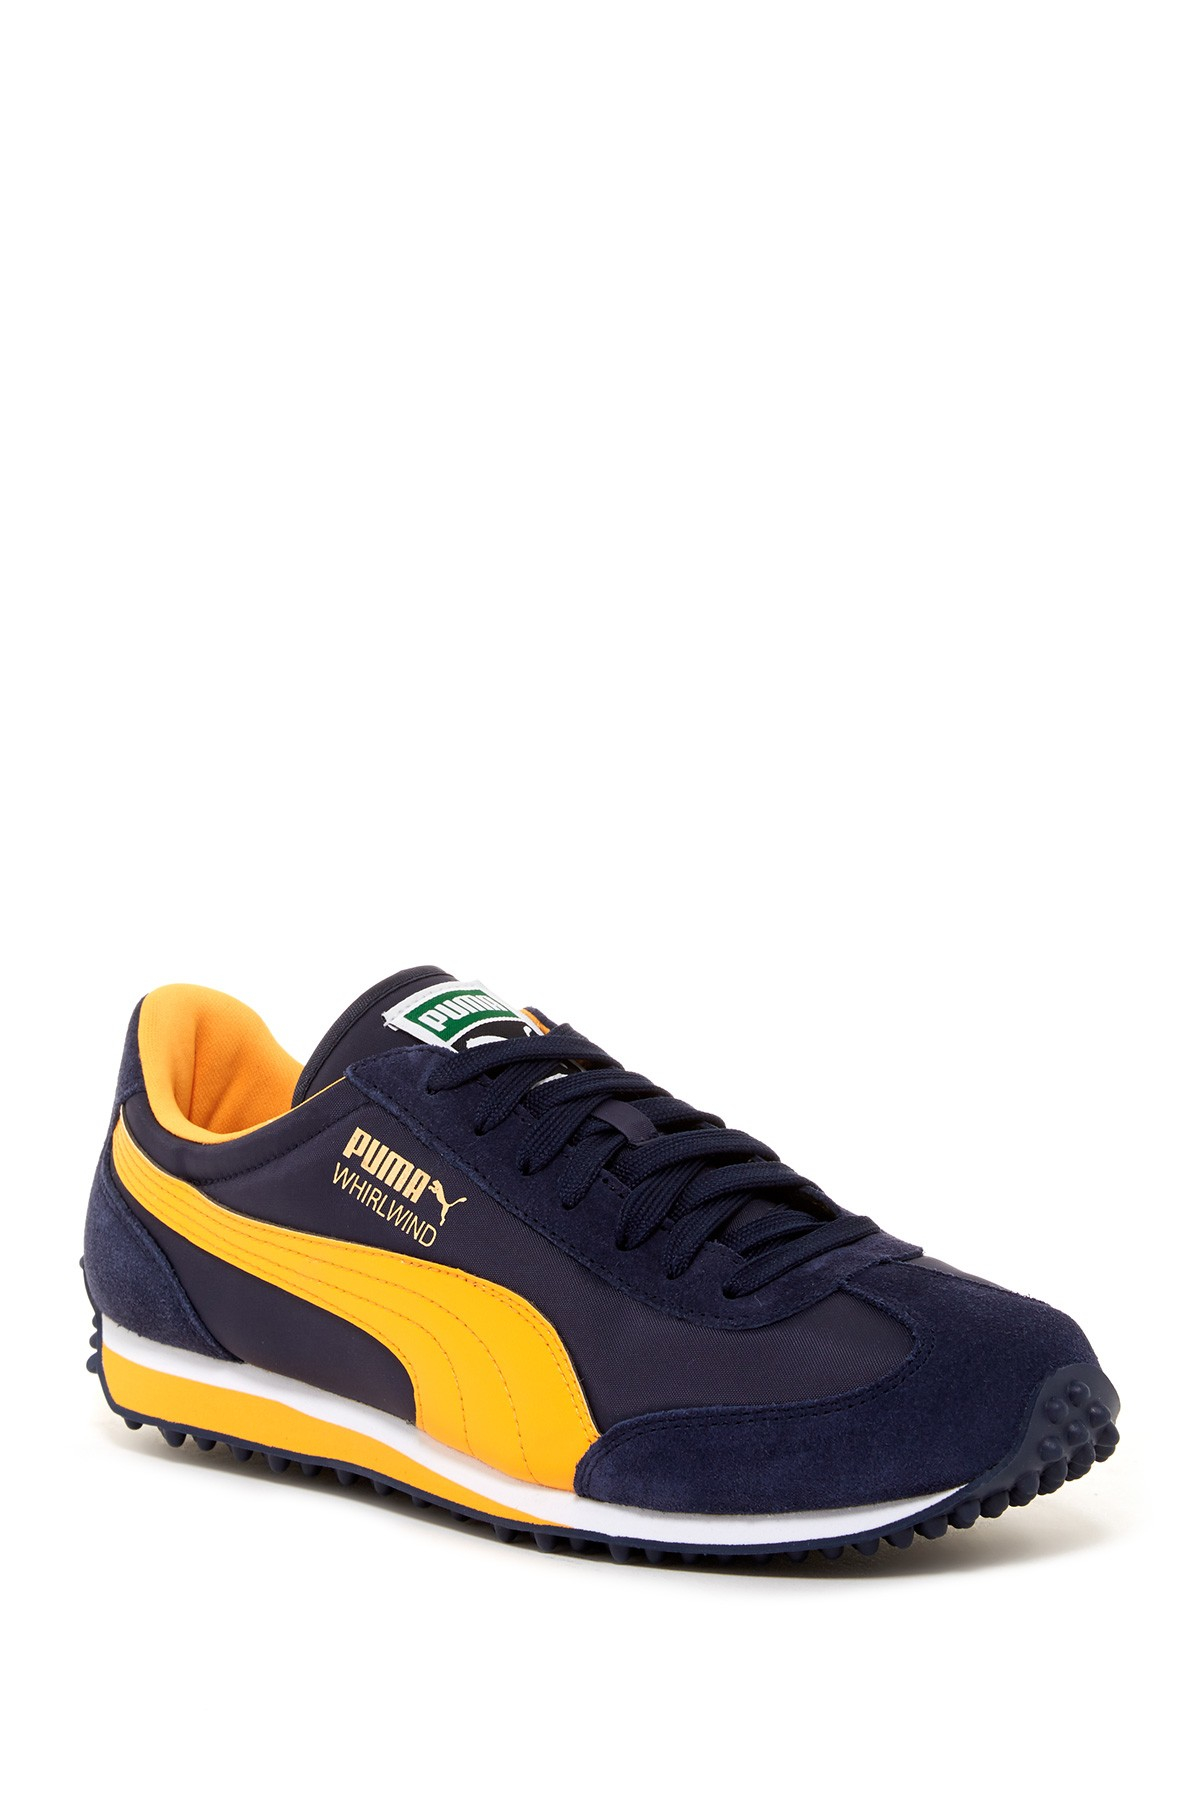 PUMA Whirlwind Classic Sneaker in for Lyst